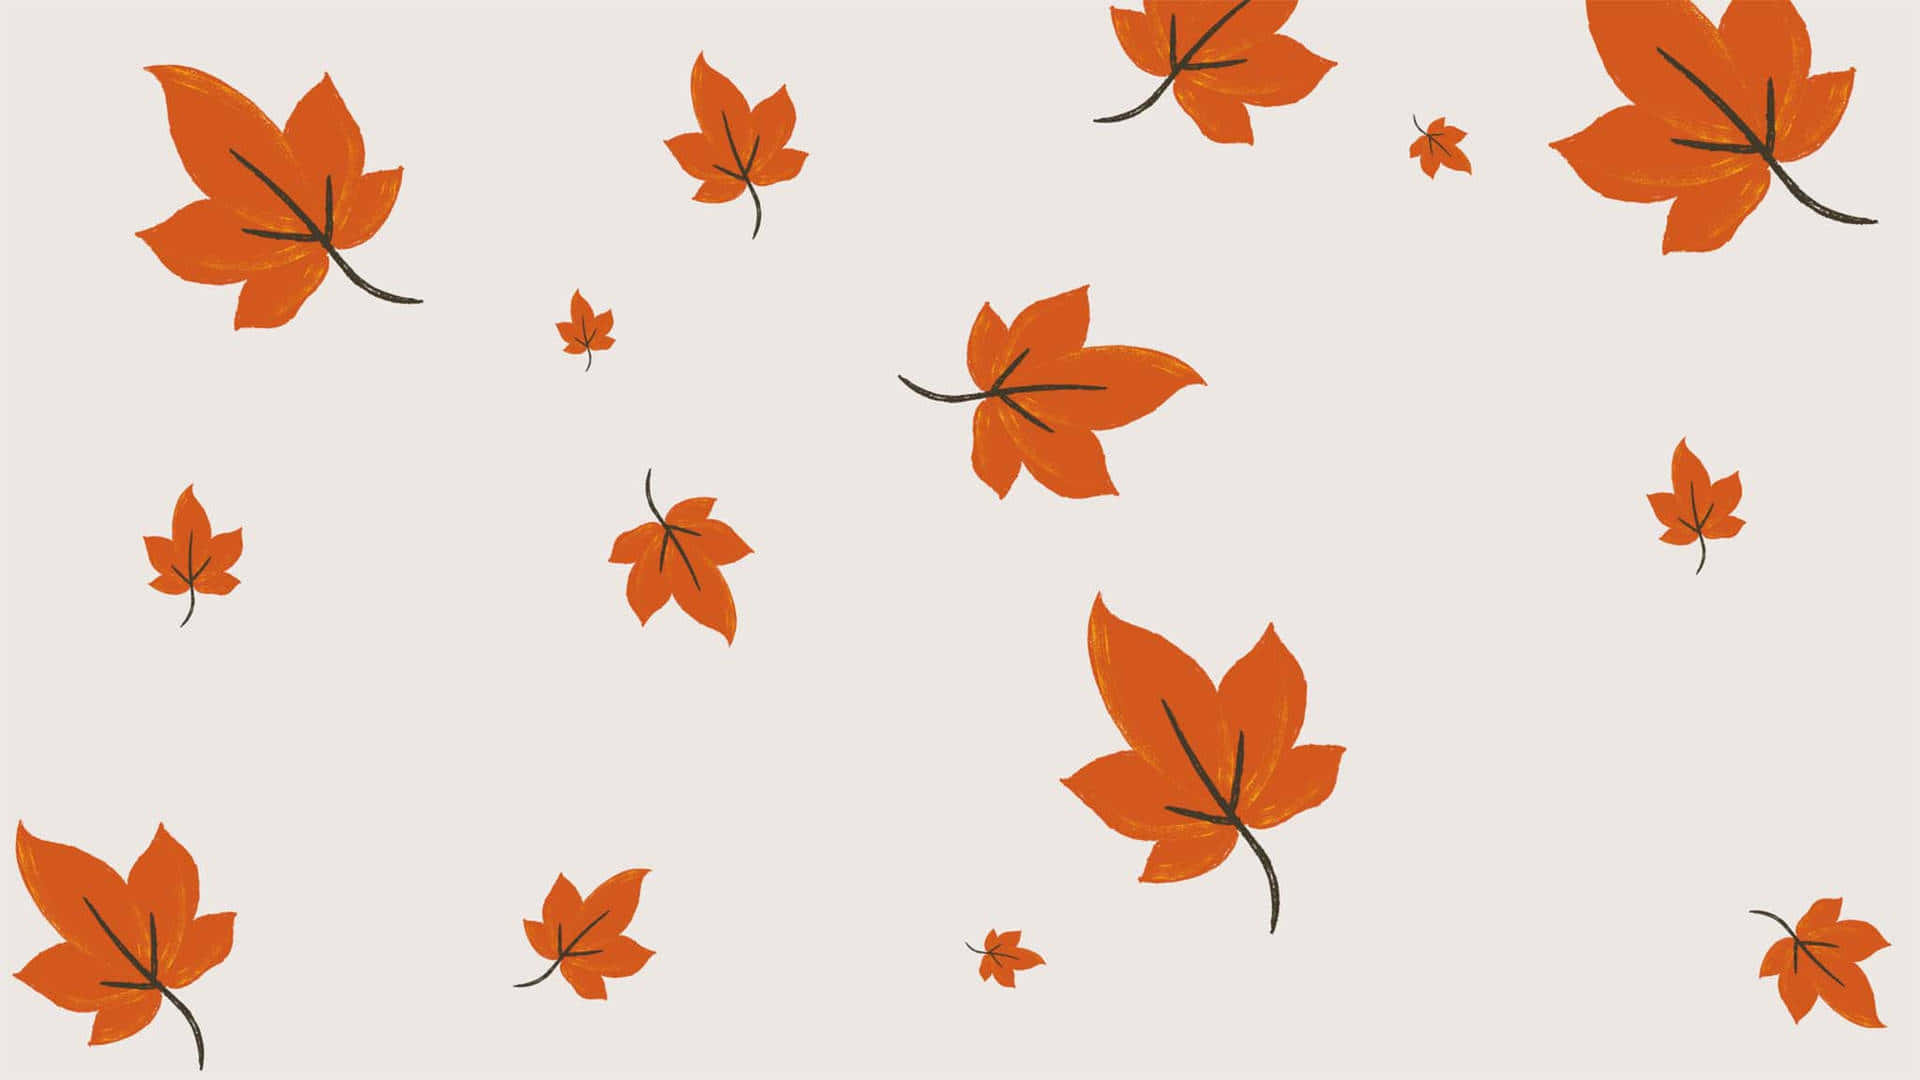 A Pattern Of Orange Leaves On A White Background Wallpaper